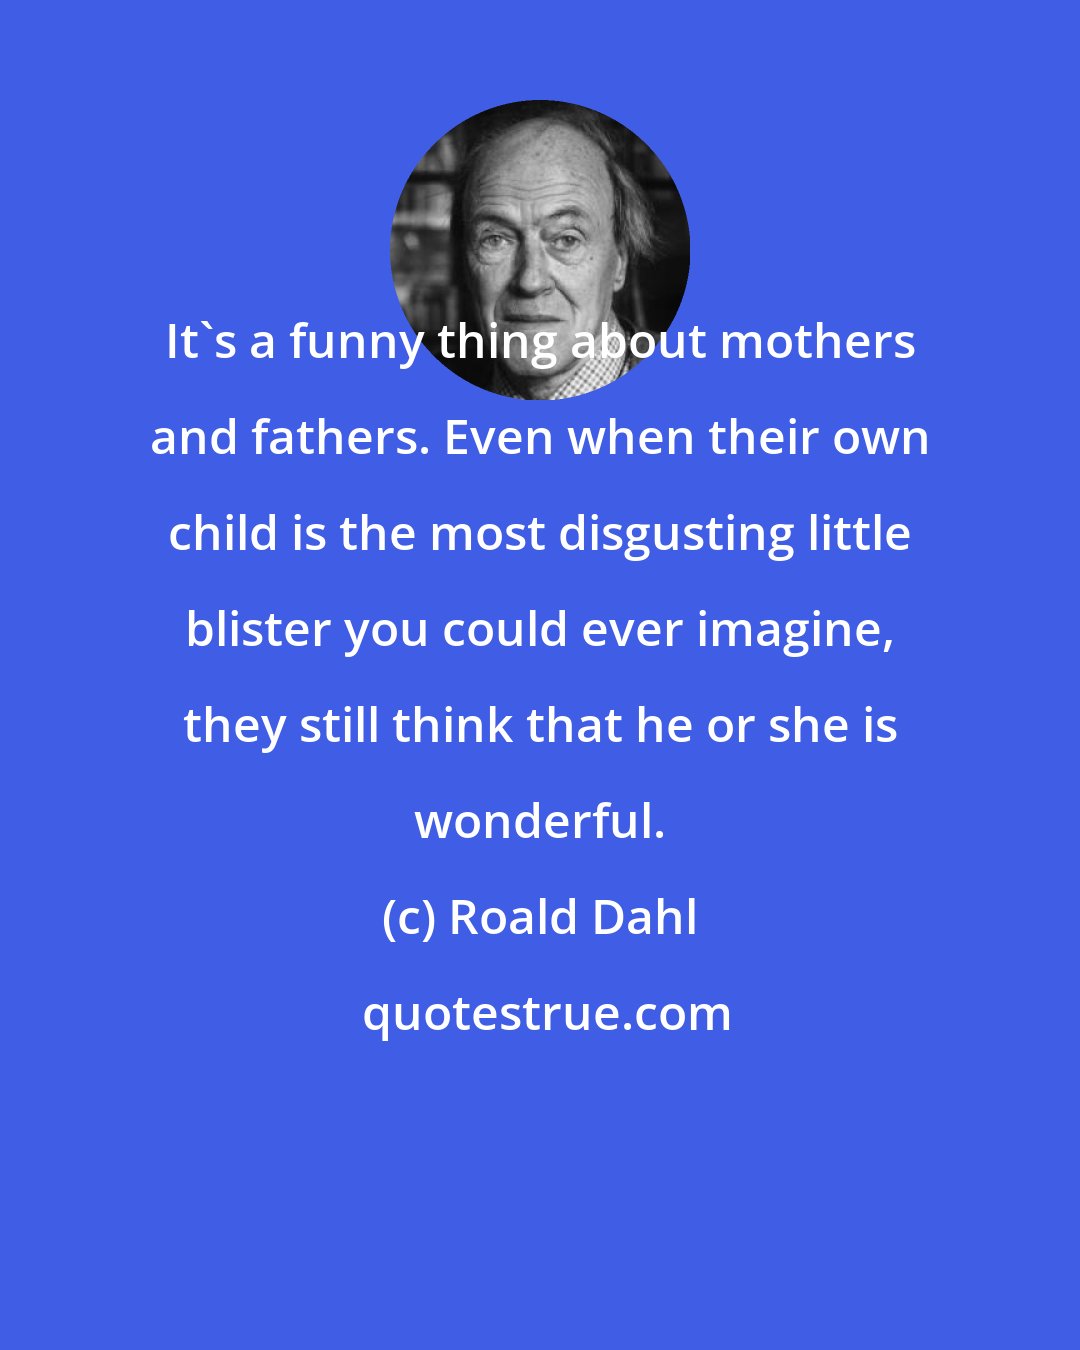 Roald Dahl: It's a funny thing about mothers and fathers. Even when their own child is the most disgusting little blister you could ever imagine, they still think that he or she is wonderful.